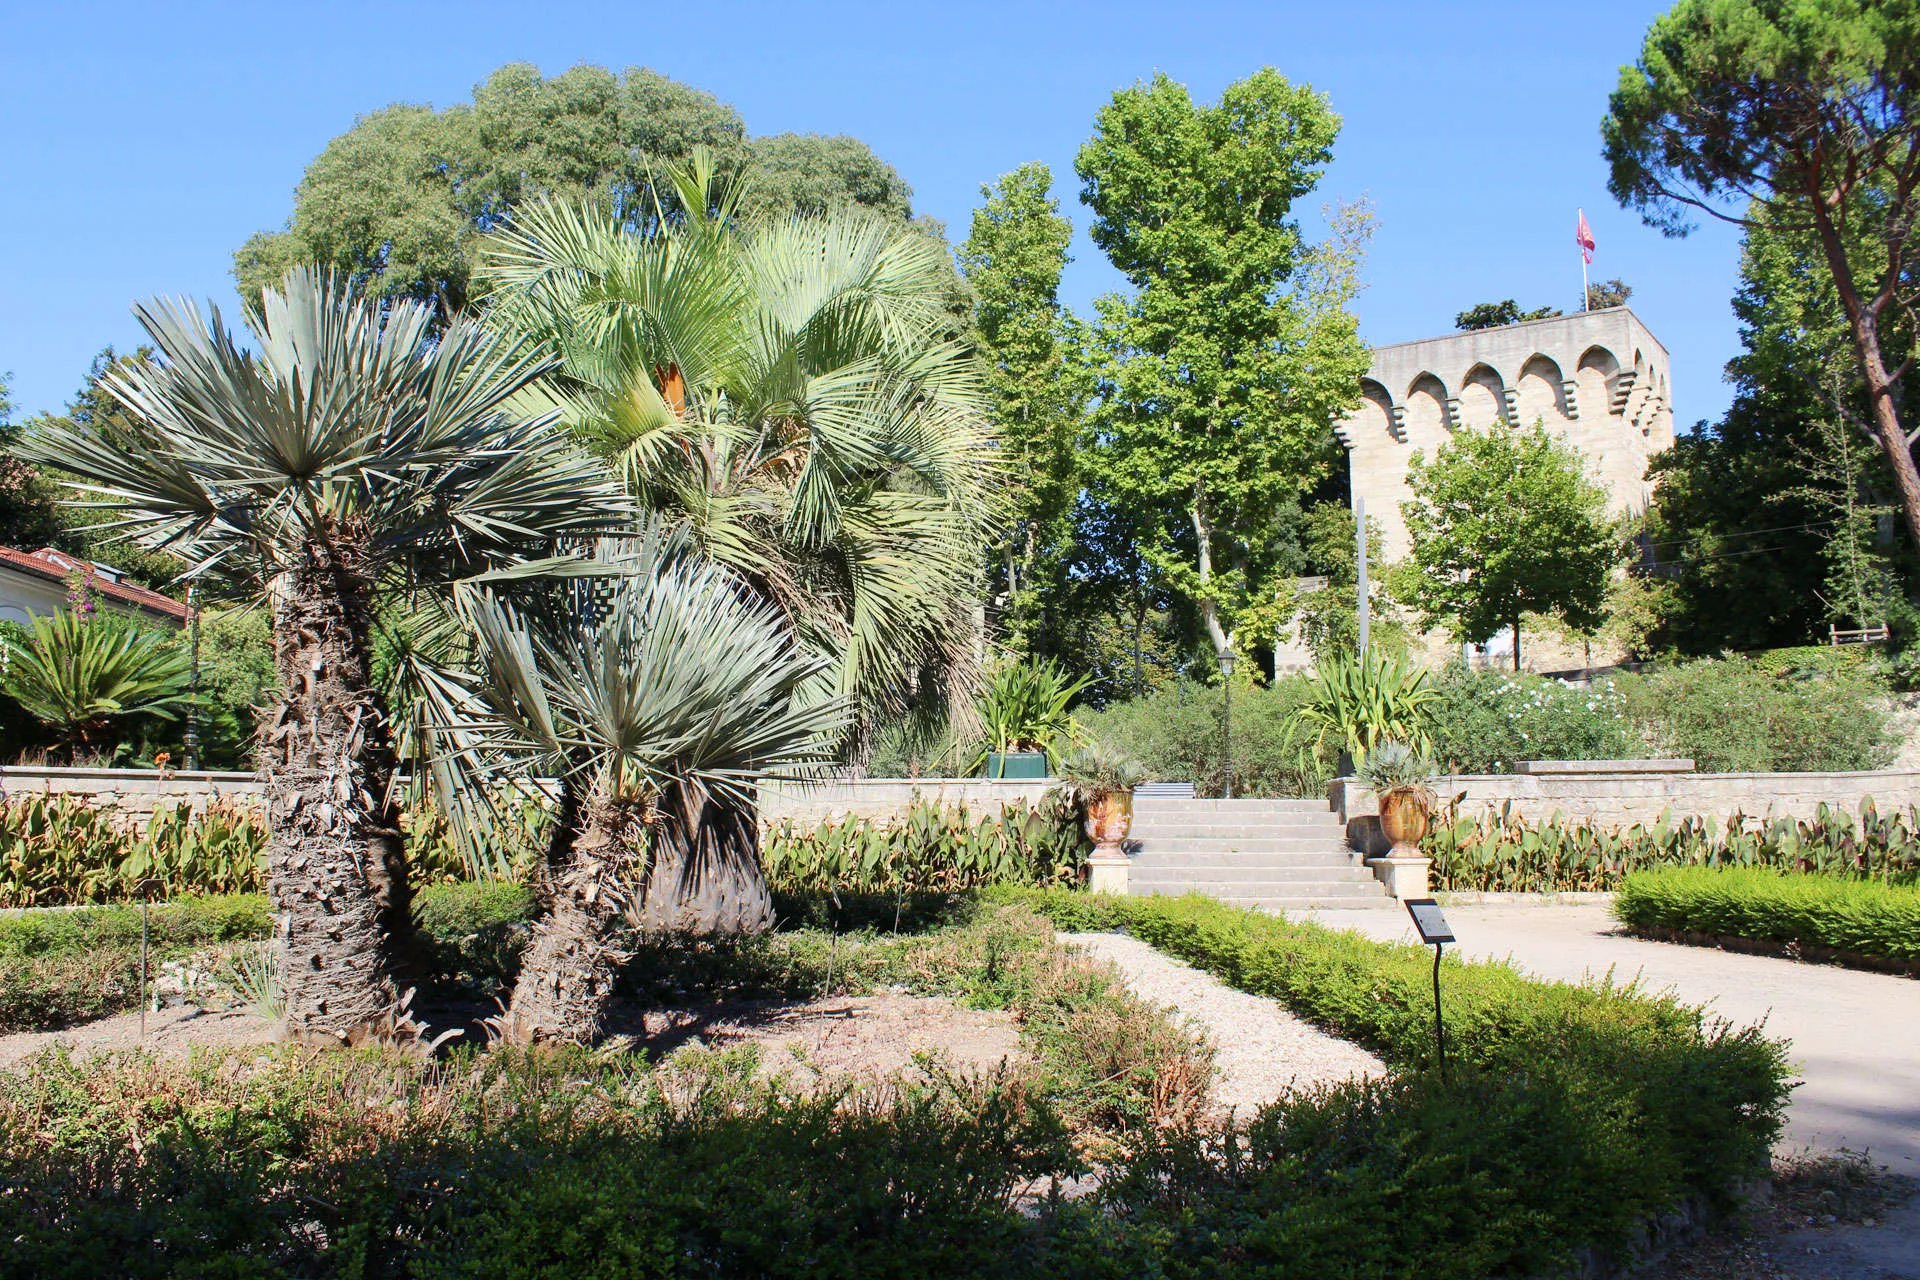 Garden of Plants in France, Europe | Botanical Gardens - Rated 4